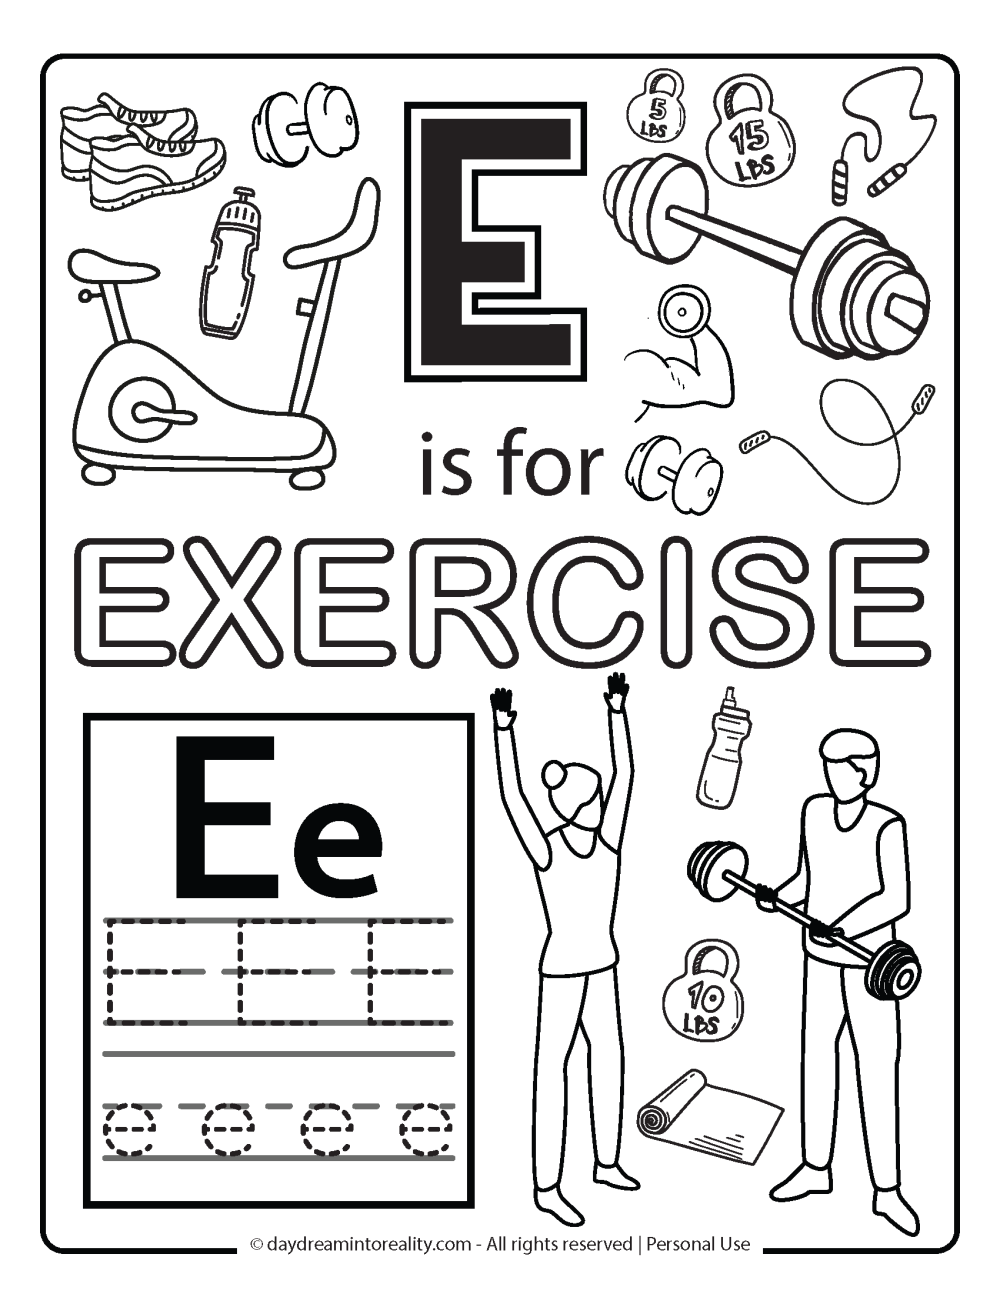 Letter E coloring page worksheet free printables. E is for exercise.